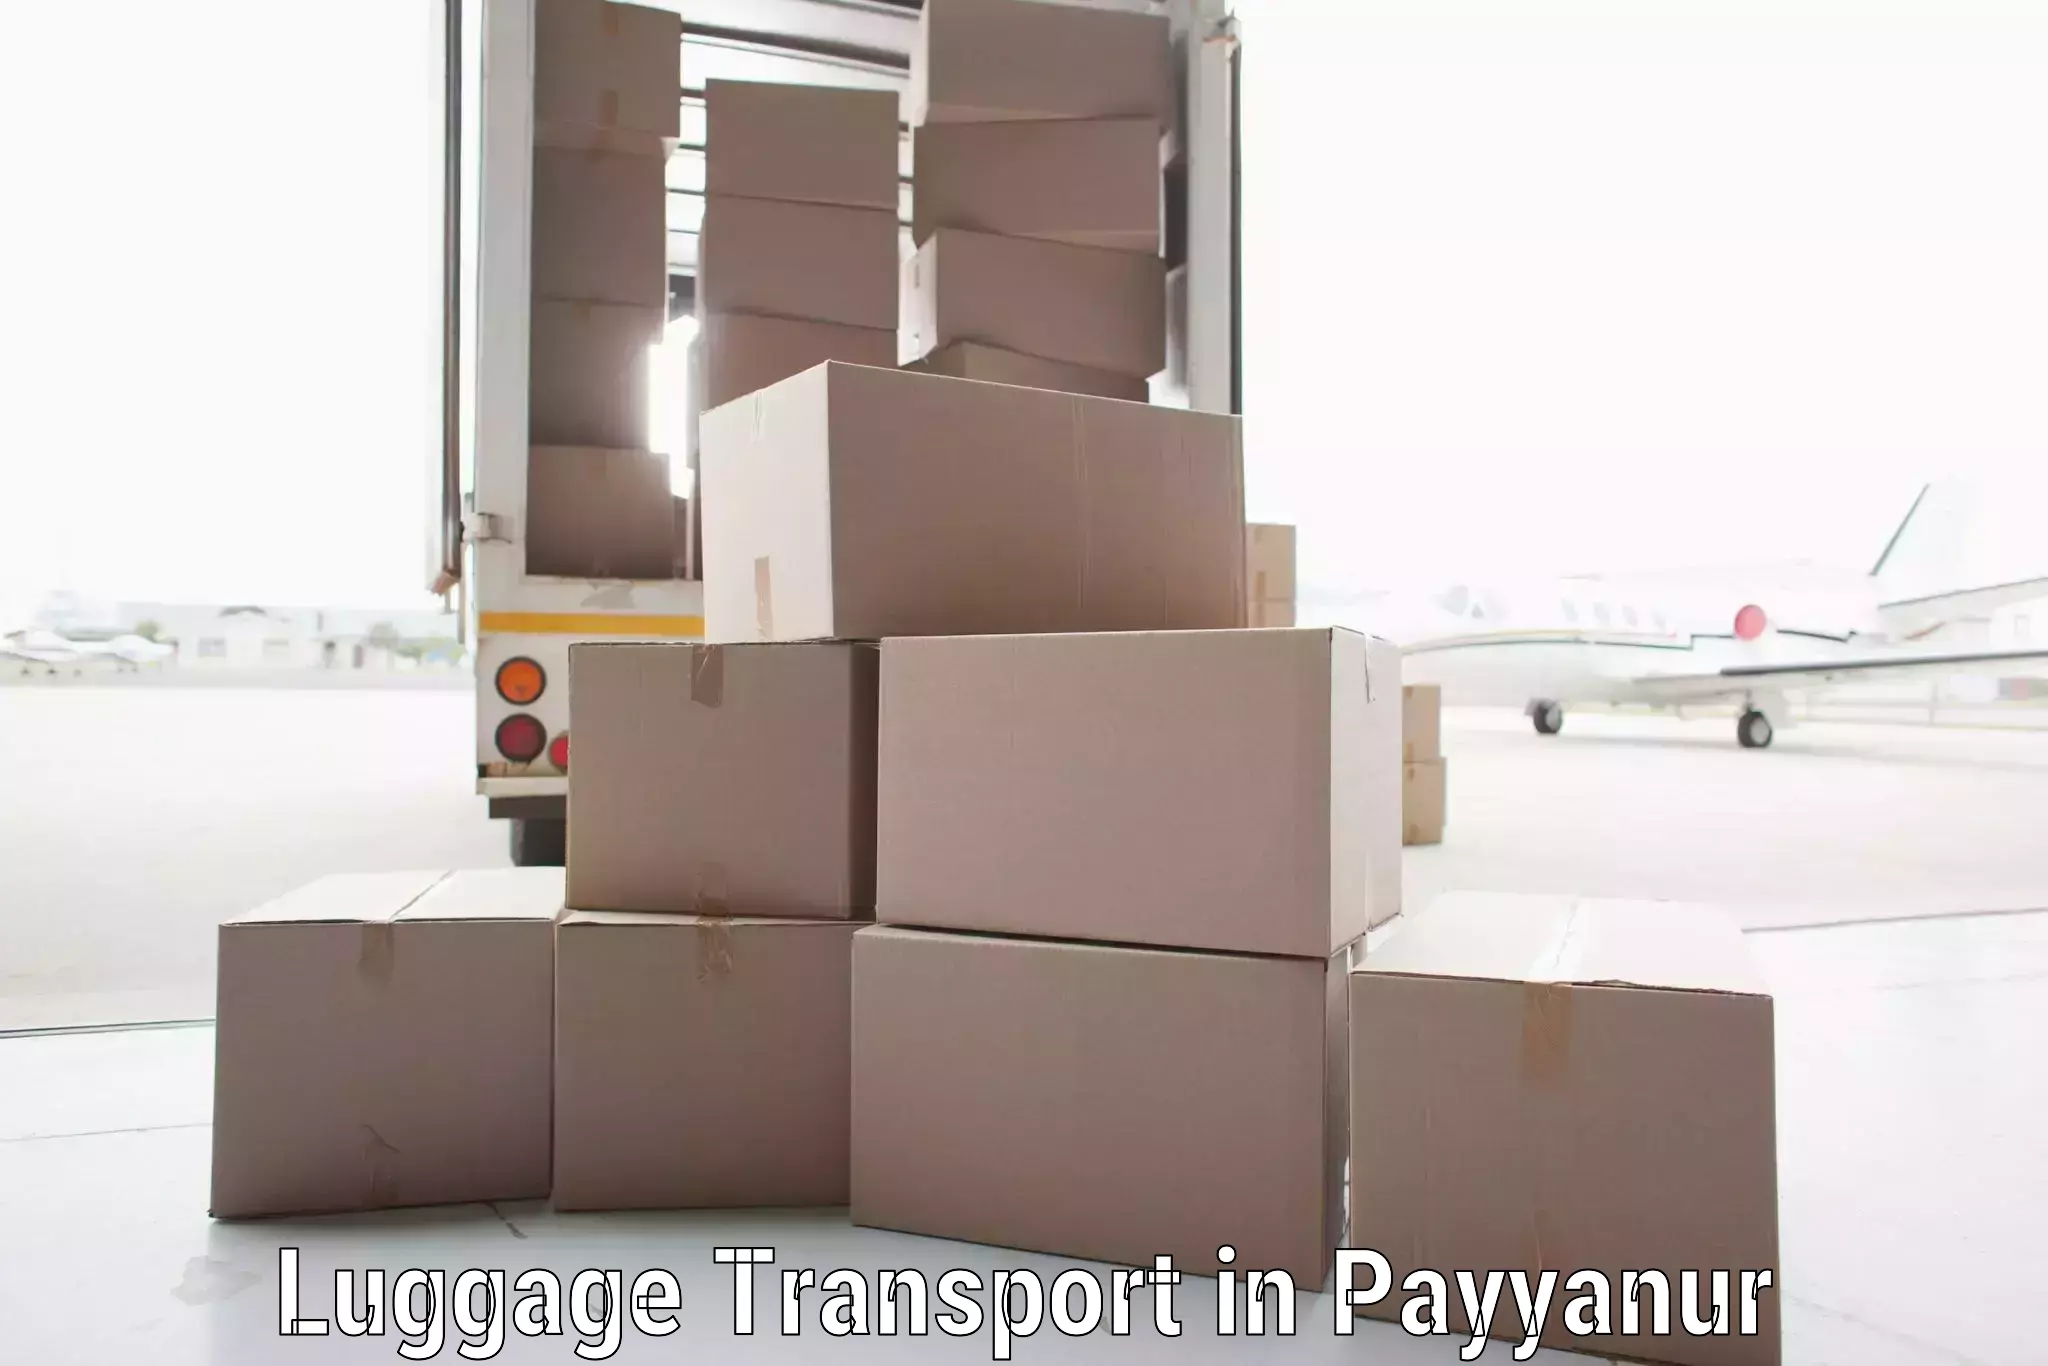 Baggage transport management in Payyanur